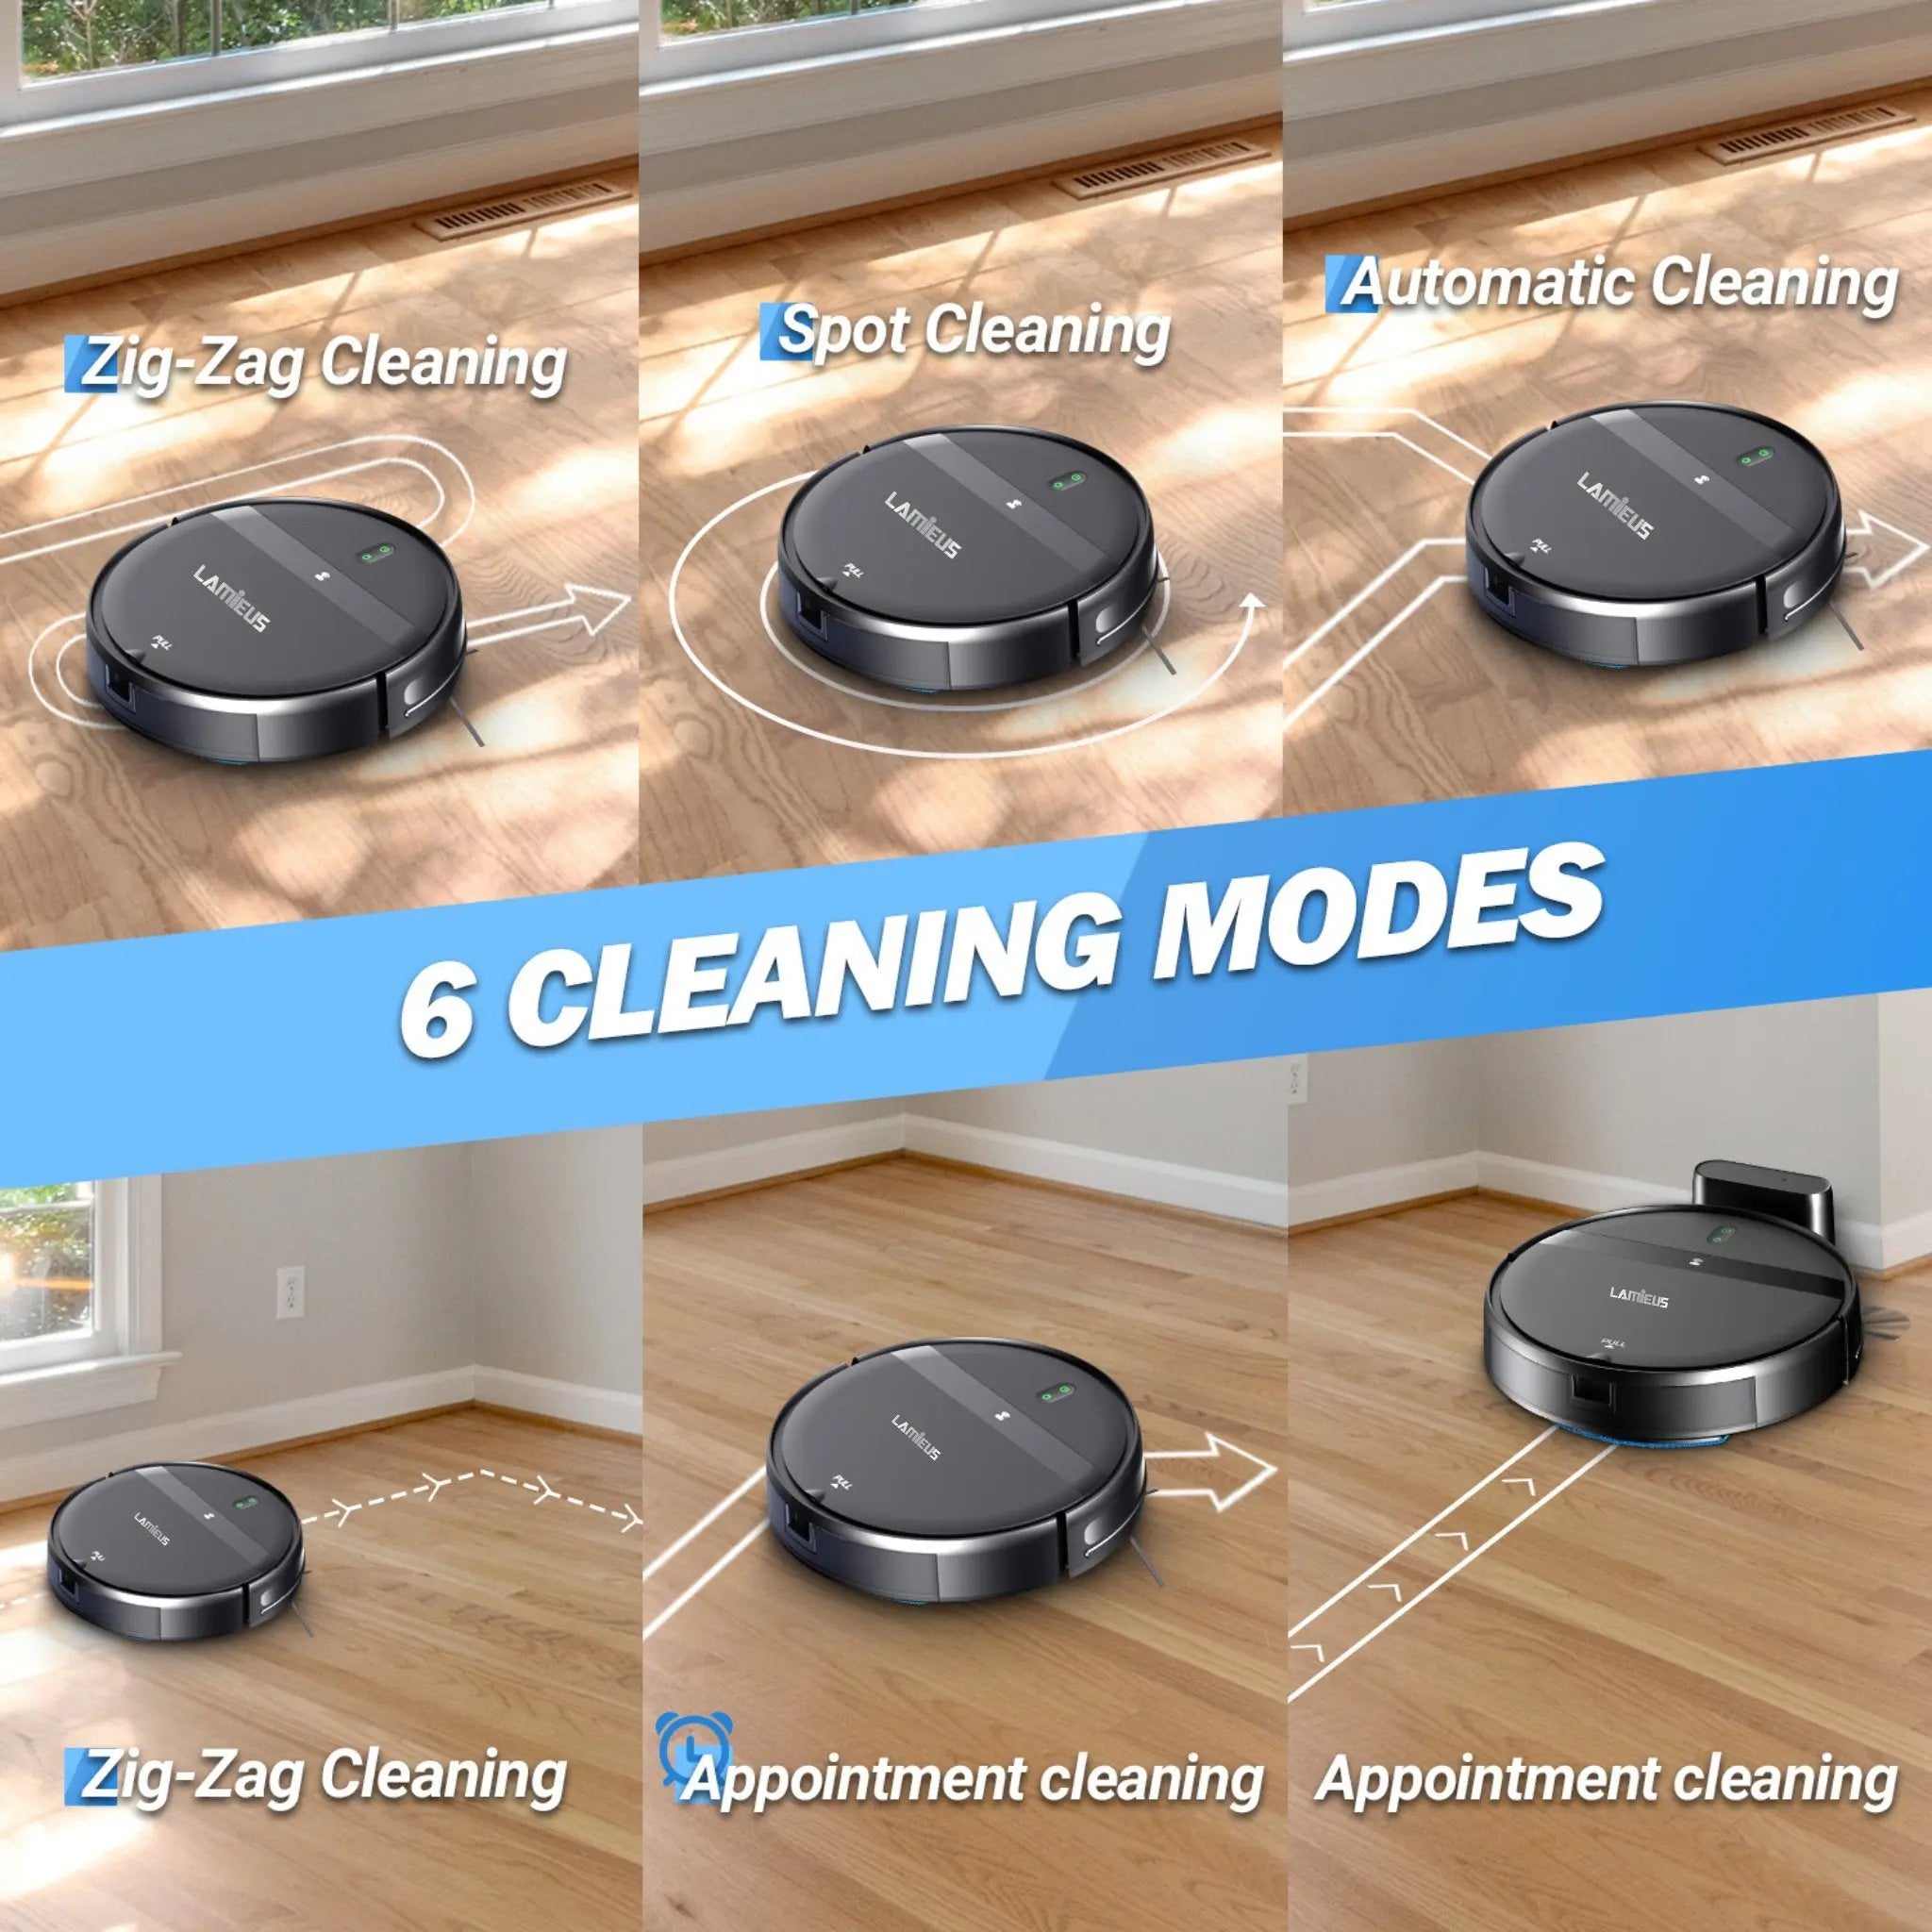 SweepGuard Quantum Vacuum Cleaner - Lamieus: Ultimate robotic cleaning solution. AI-driven navigation, intuitive scheduling, HEPA filtration. Quiet operation, long runtime